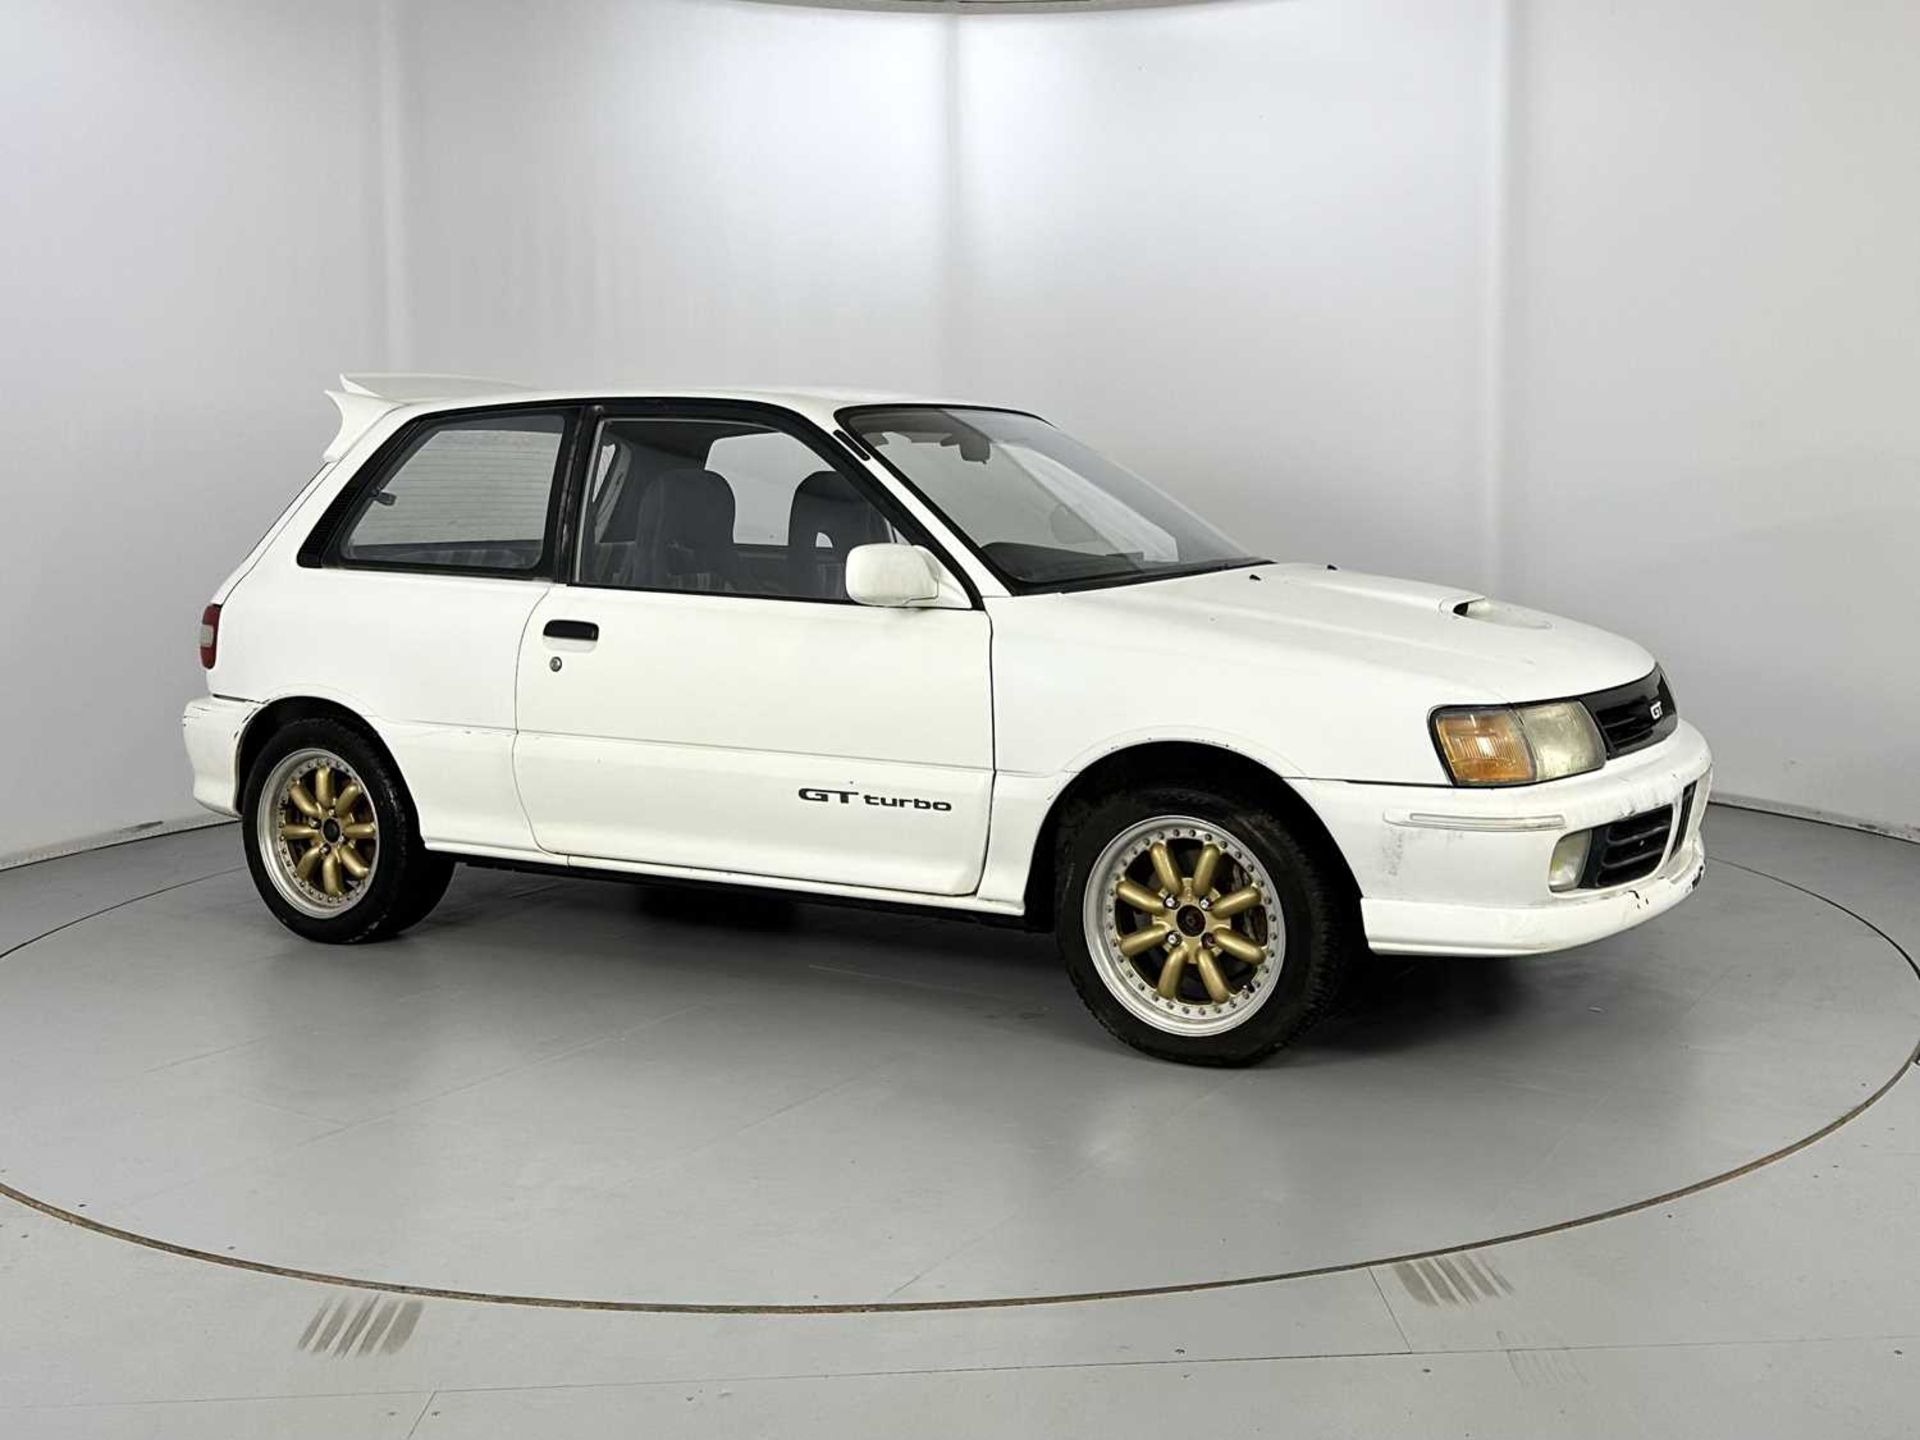 1990 Toyota Starlet GT Turbo - Image 12 of 29